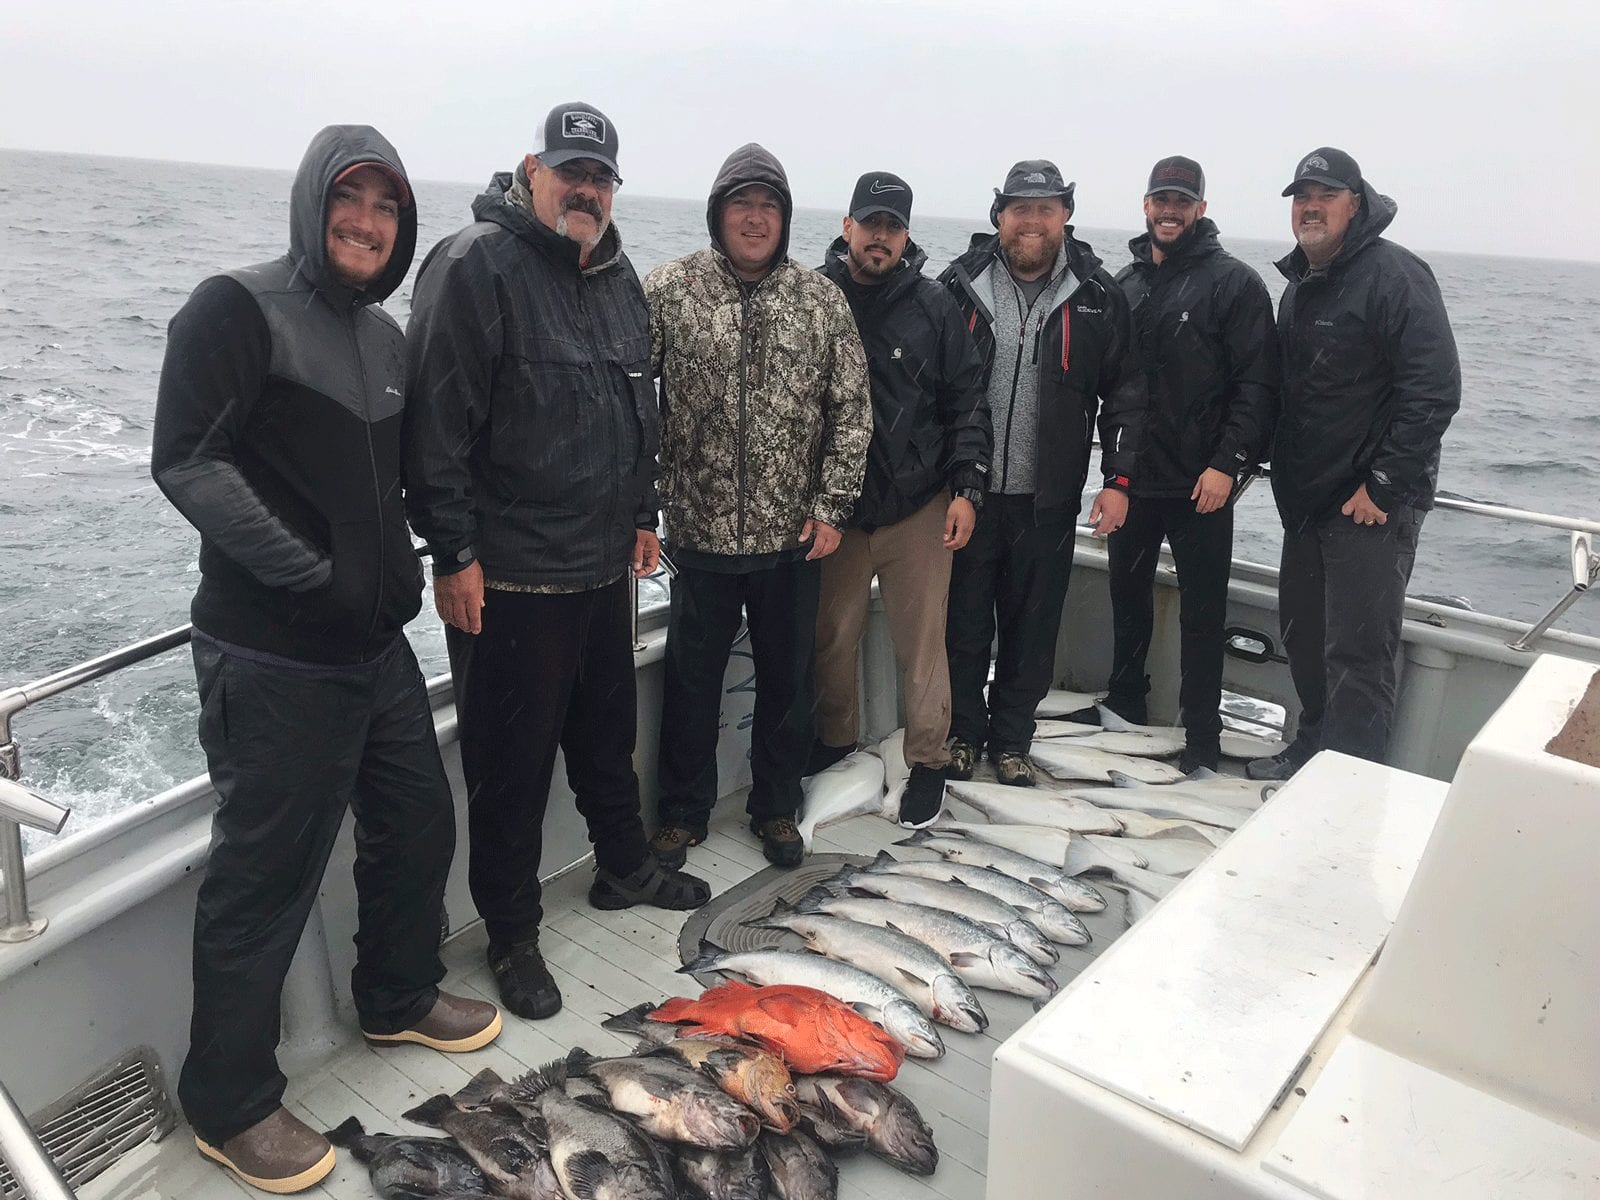 Six men on Alaskan fishing boat with their catches